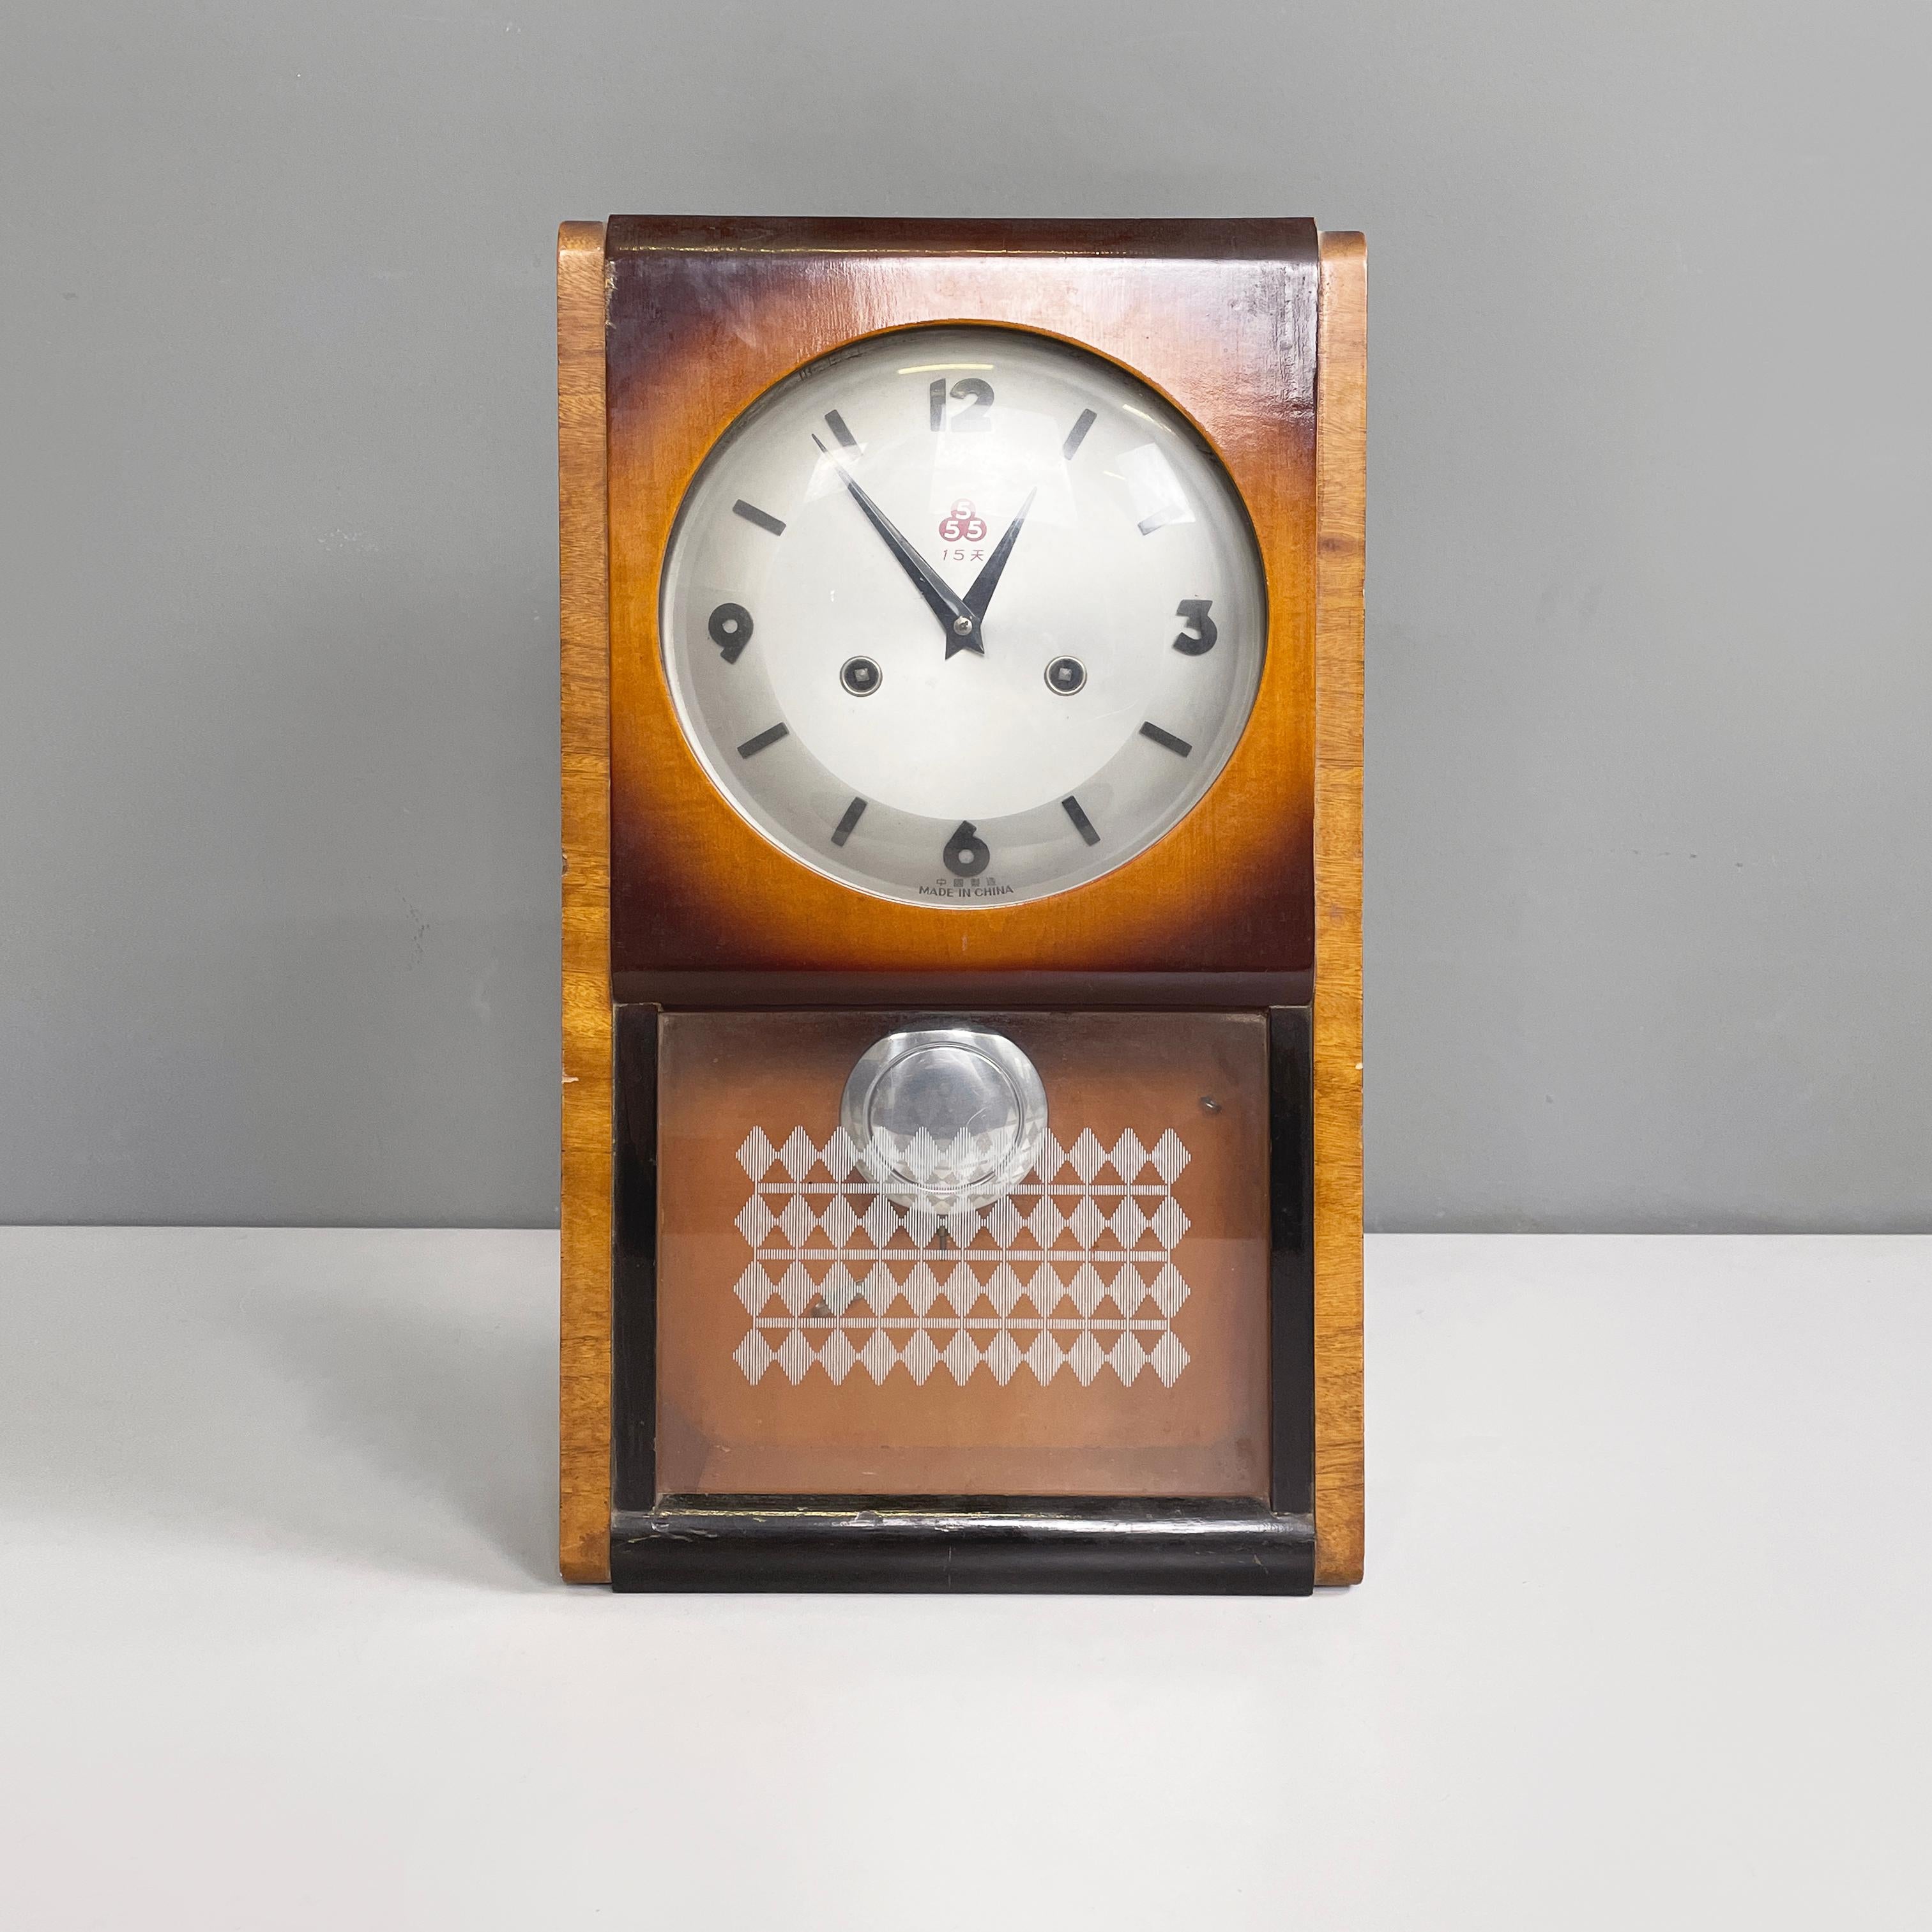 Italian modern Wall or table pendulum clock by 555 Shanghai in wood, metal and glass, 1980s
Wall or table pendulum clock with square wooden structure in different shades. On the front it has a door in wood and glass, stopped by a lateral metal hook.